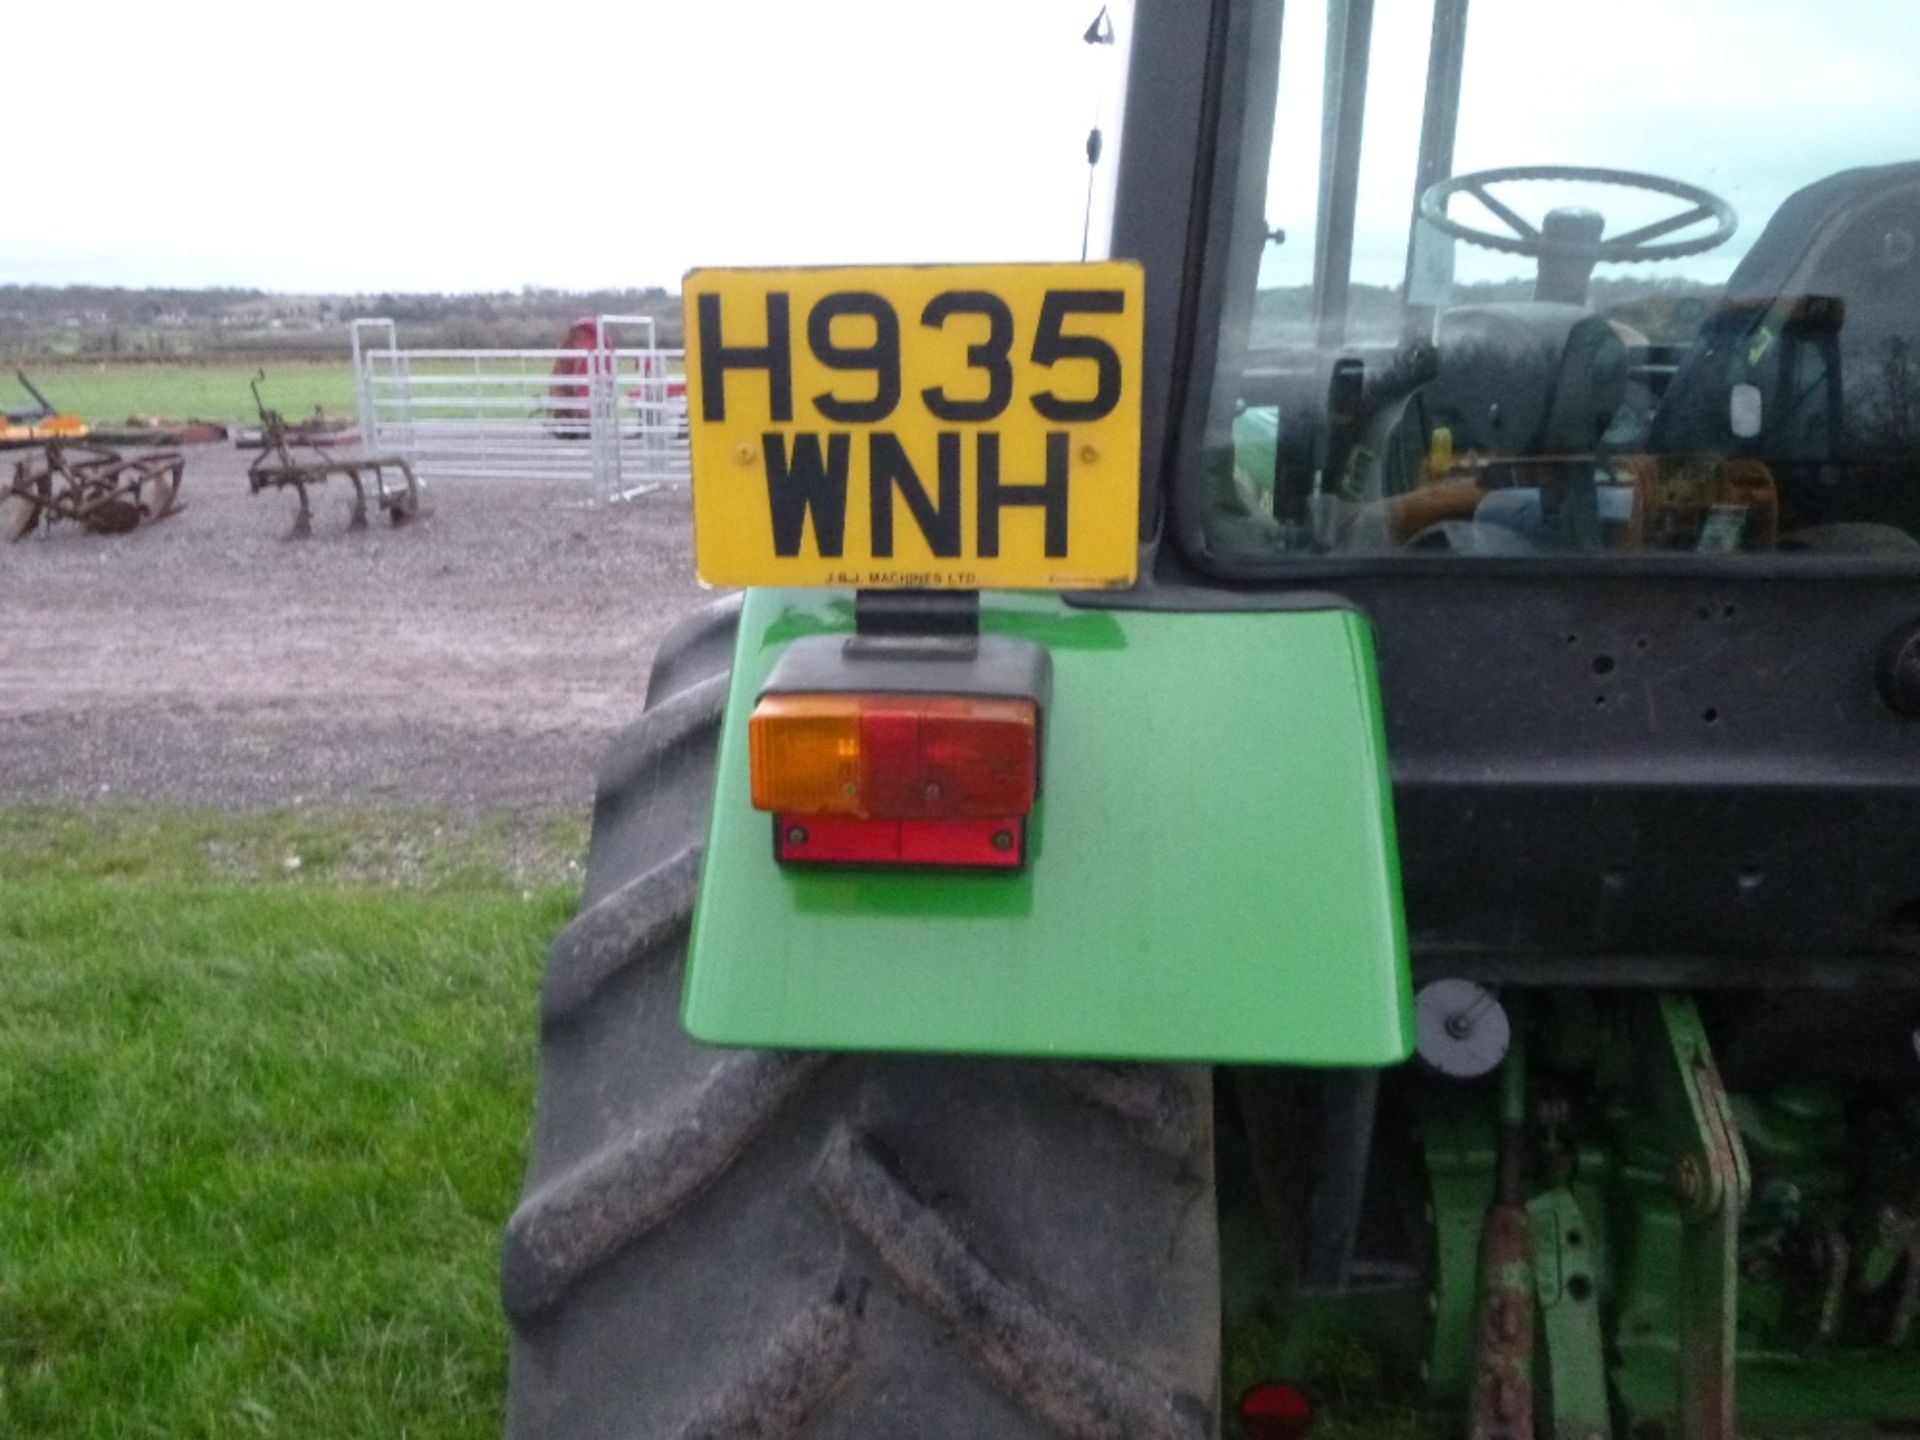 John Deere 2650 2wd Tractor. V5 will be supplied.  9500 hrs.  Reg.No. H935 WHN - Image 6 of 8